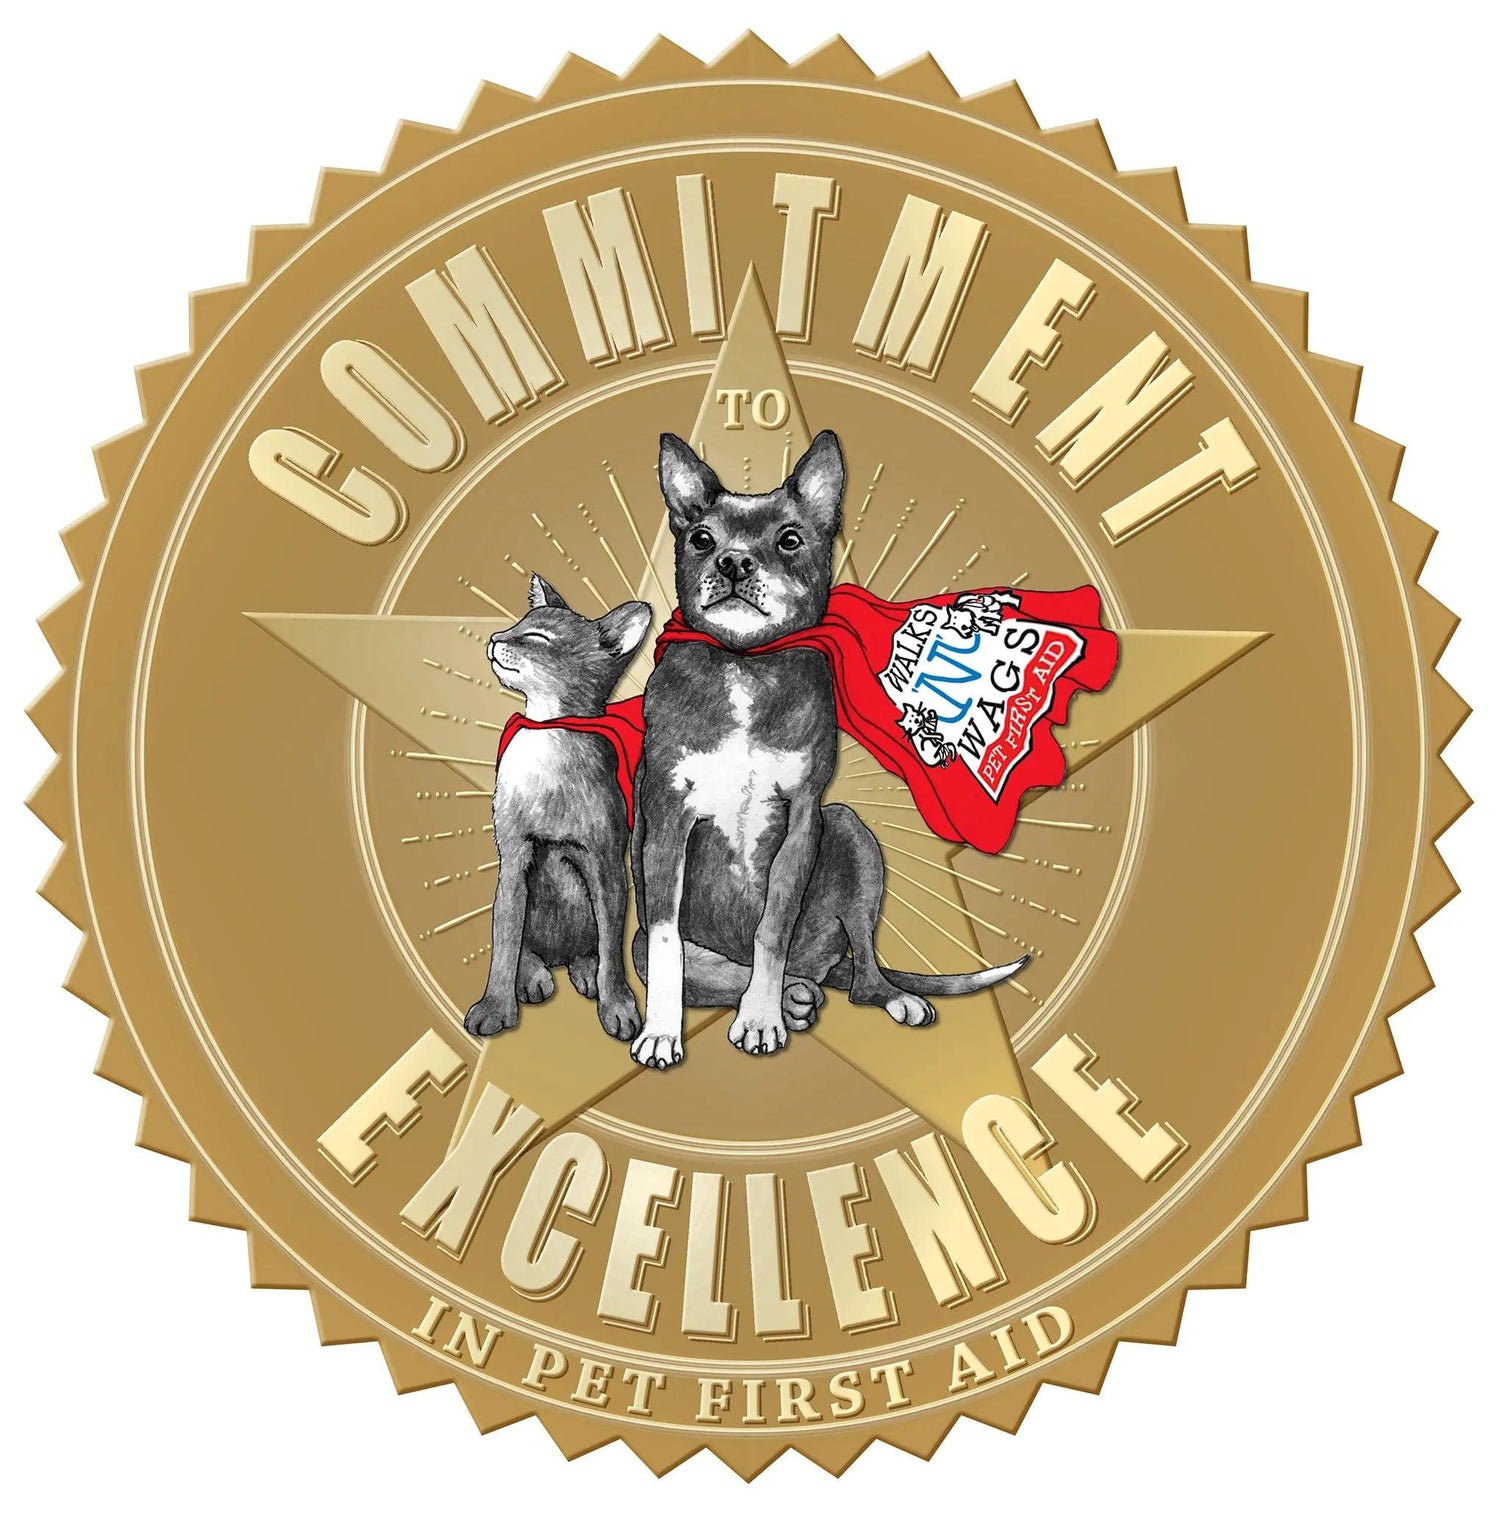 Walks 'N' Wags Commitment to Excellence logo with a cat and a dog with super hero capes on.